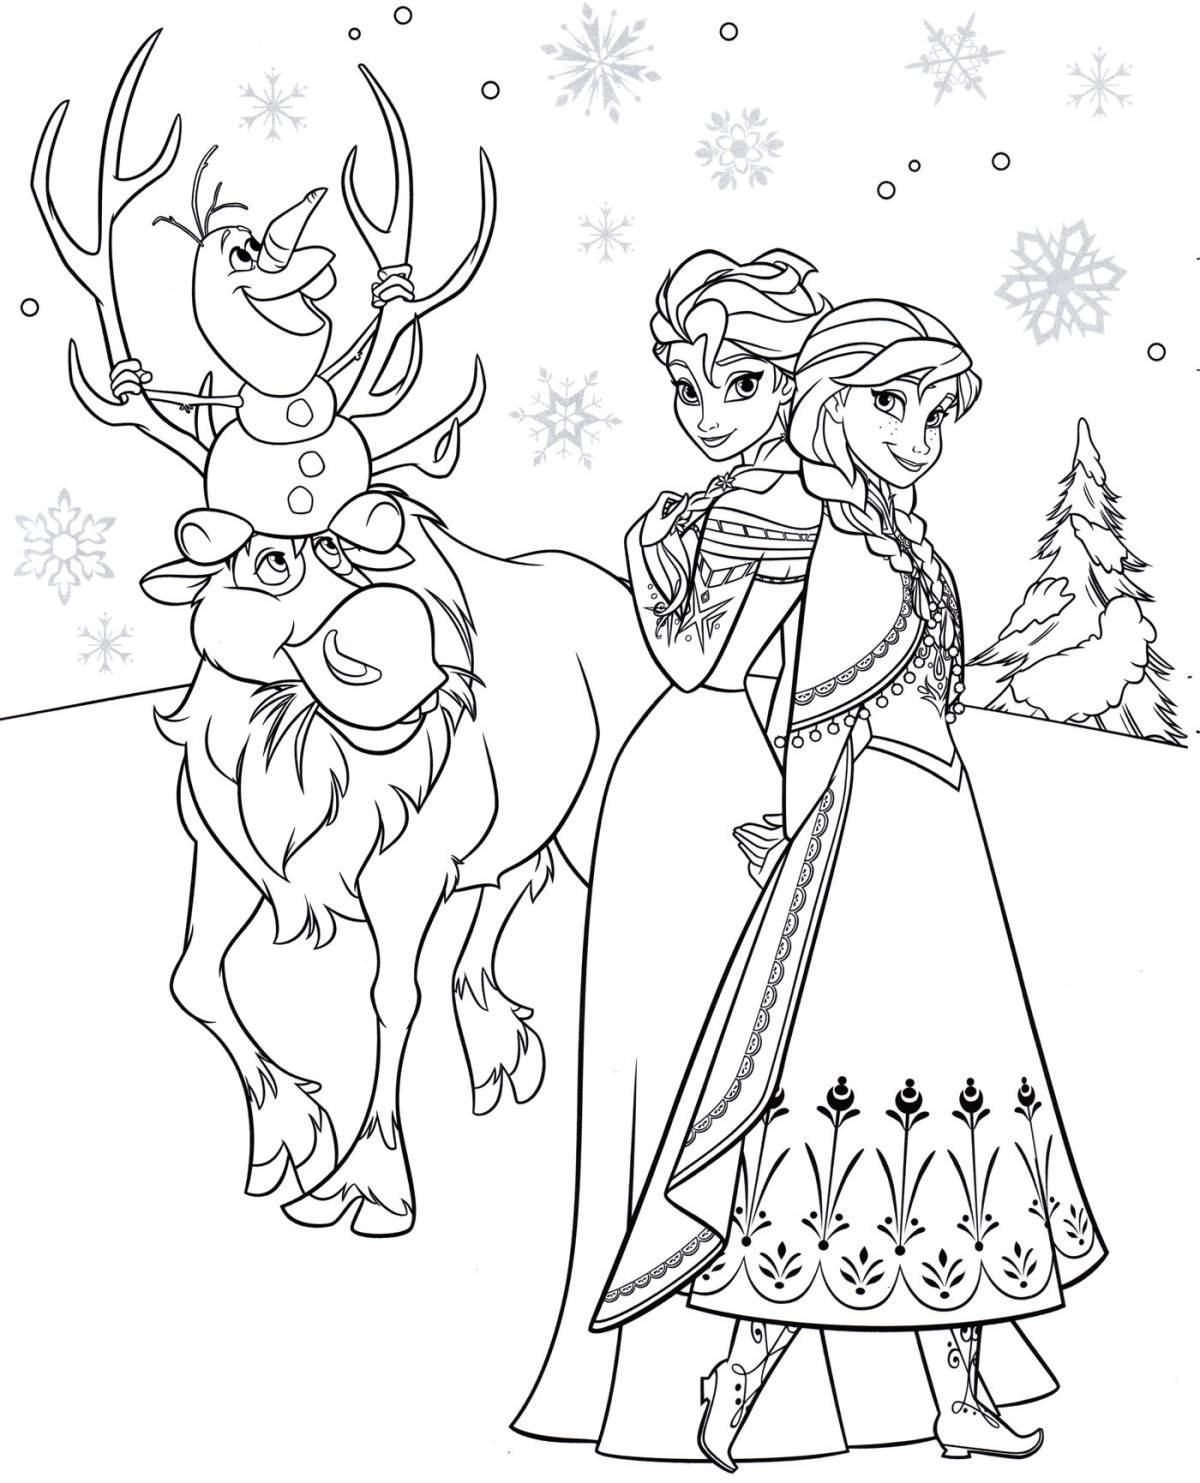 Frozen coloring book for girls